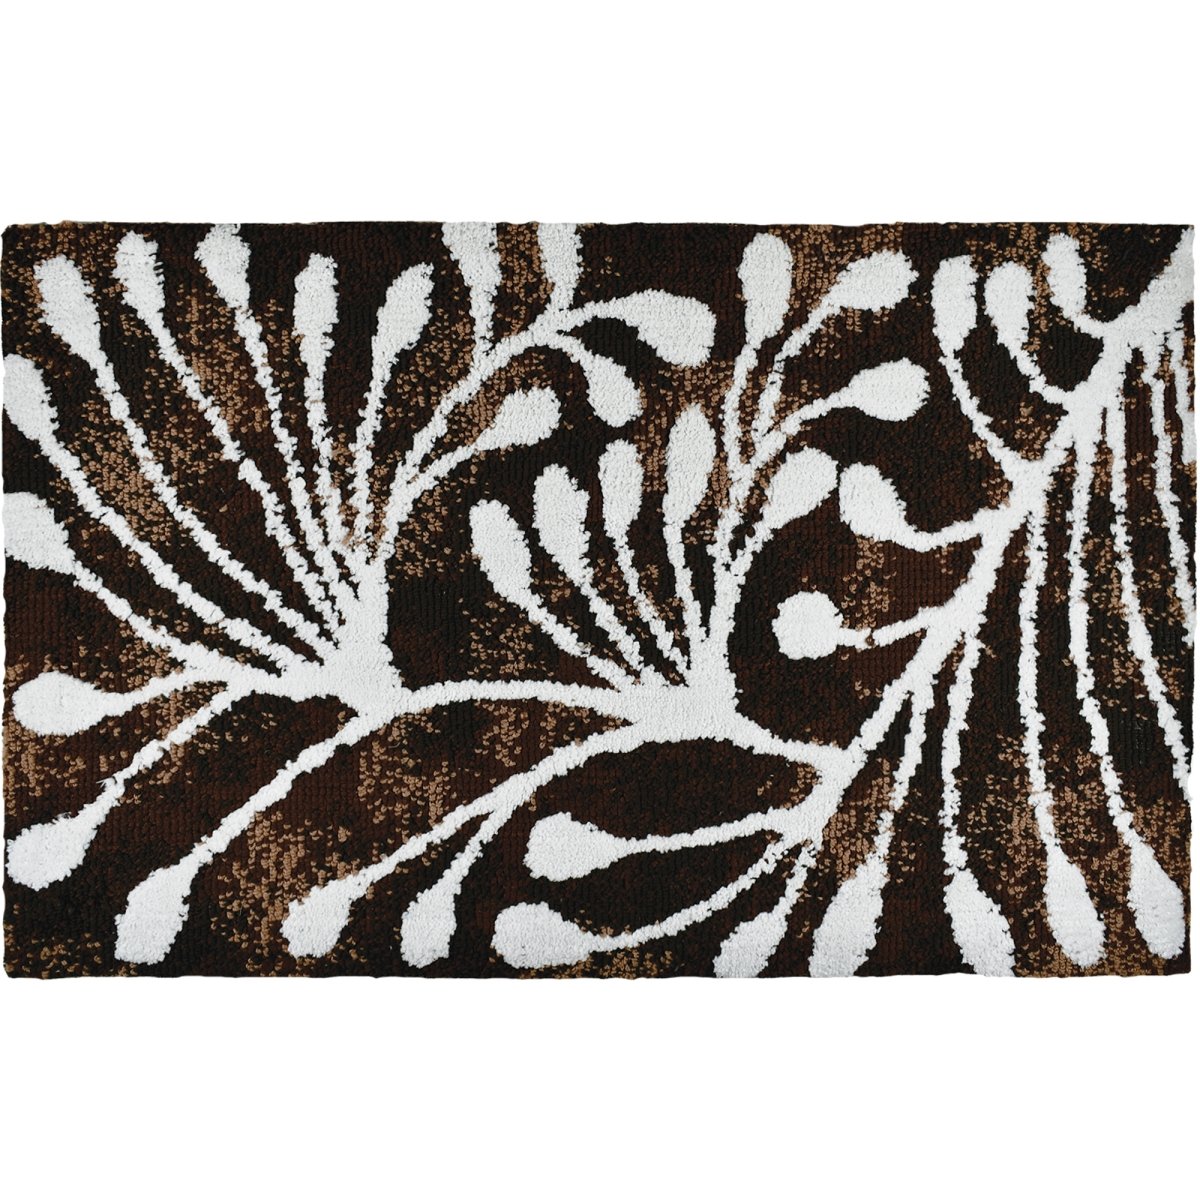 Ss-mp001b 21 X 33 In. Budding Branches Accent Rug